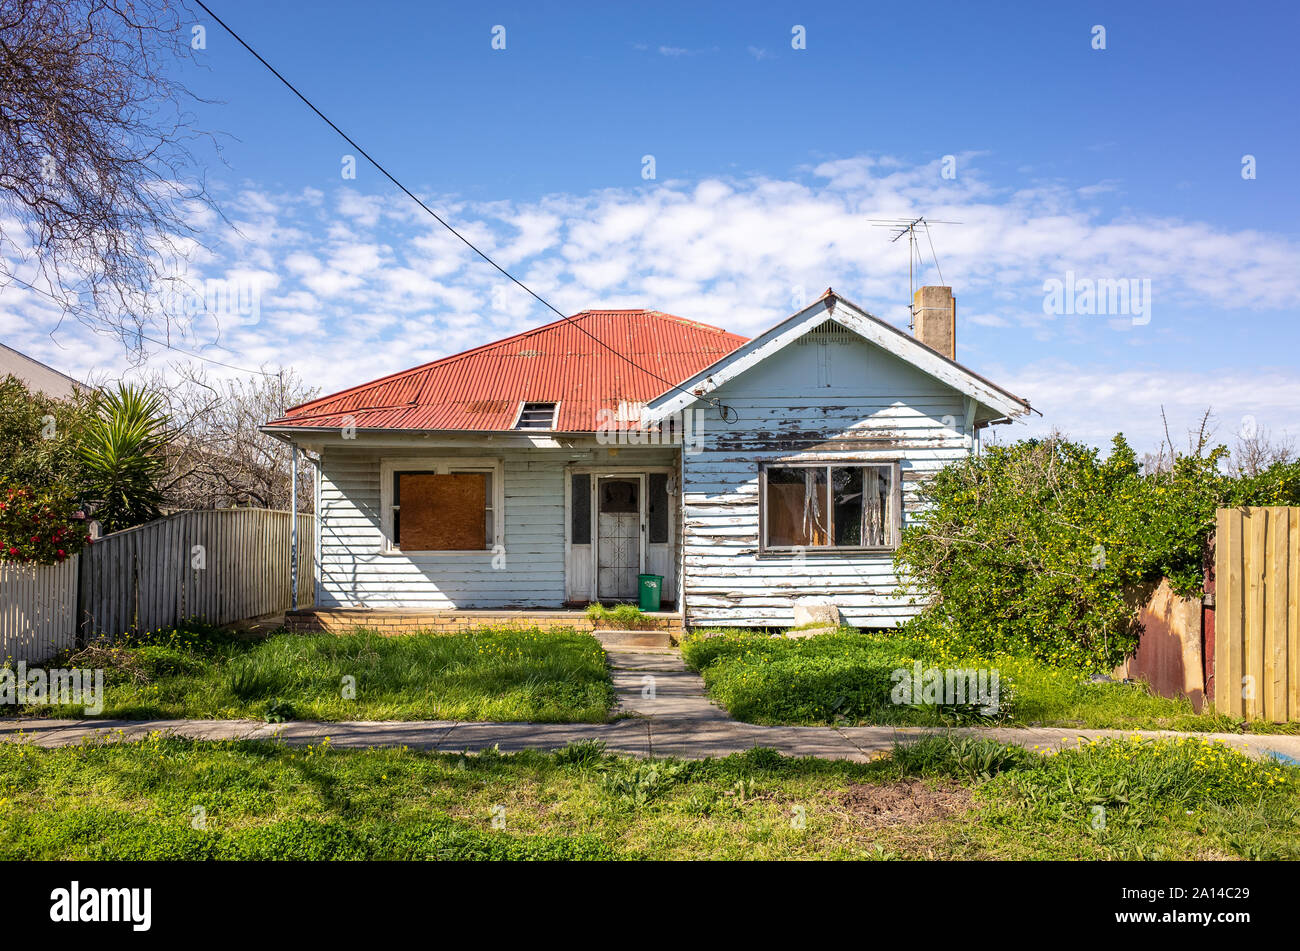 An old and shabby residential house with an unattended front yard. Australian weatherboard home with a corrugated iron roof. Stock Photo